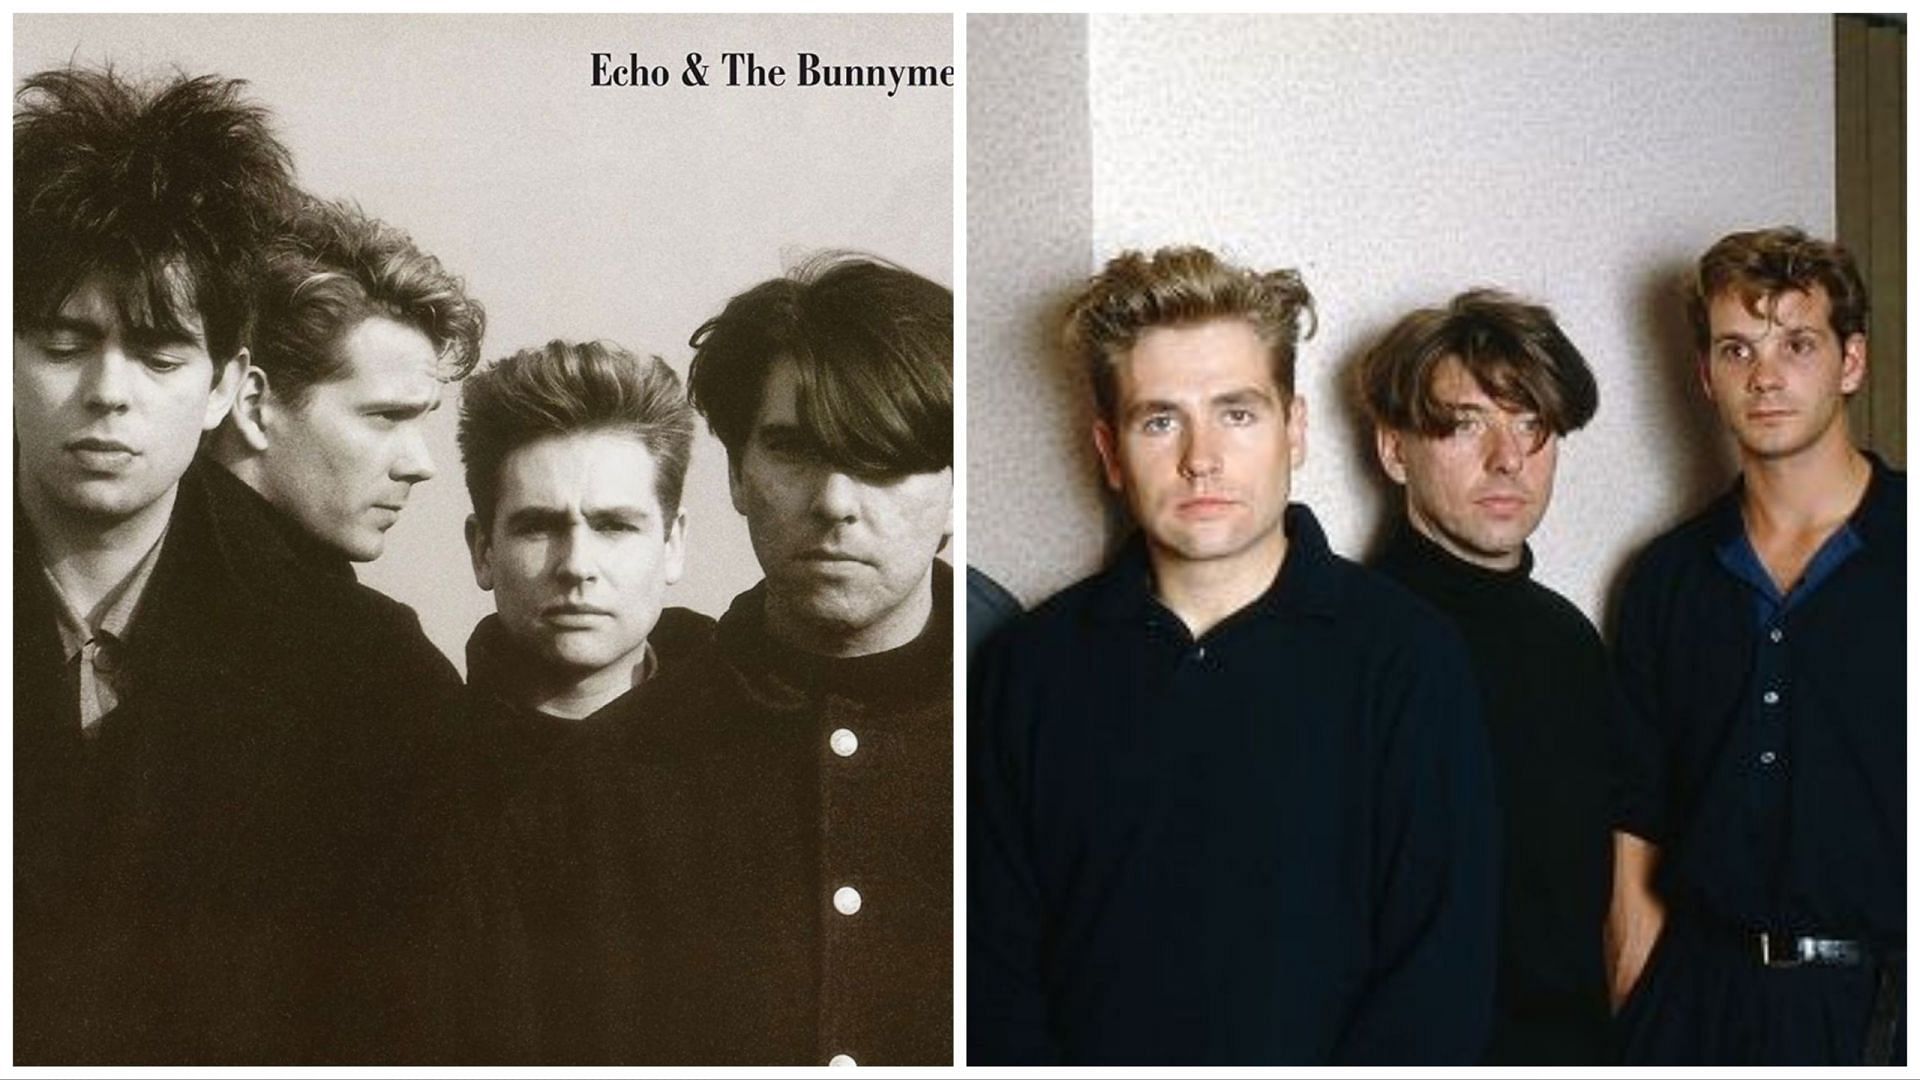 Two portrait of Echo and The Bunnymen (Images via official Instagram @officialbunnymen)